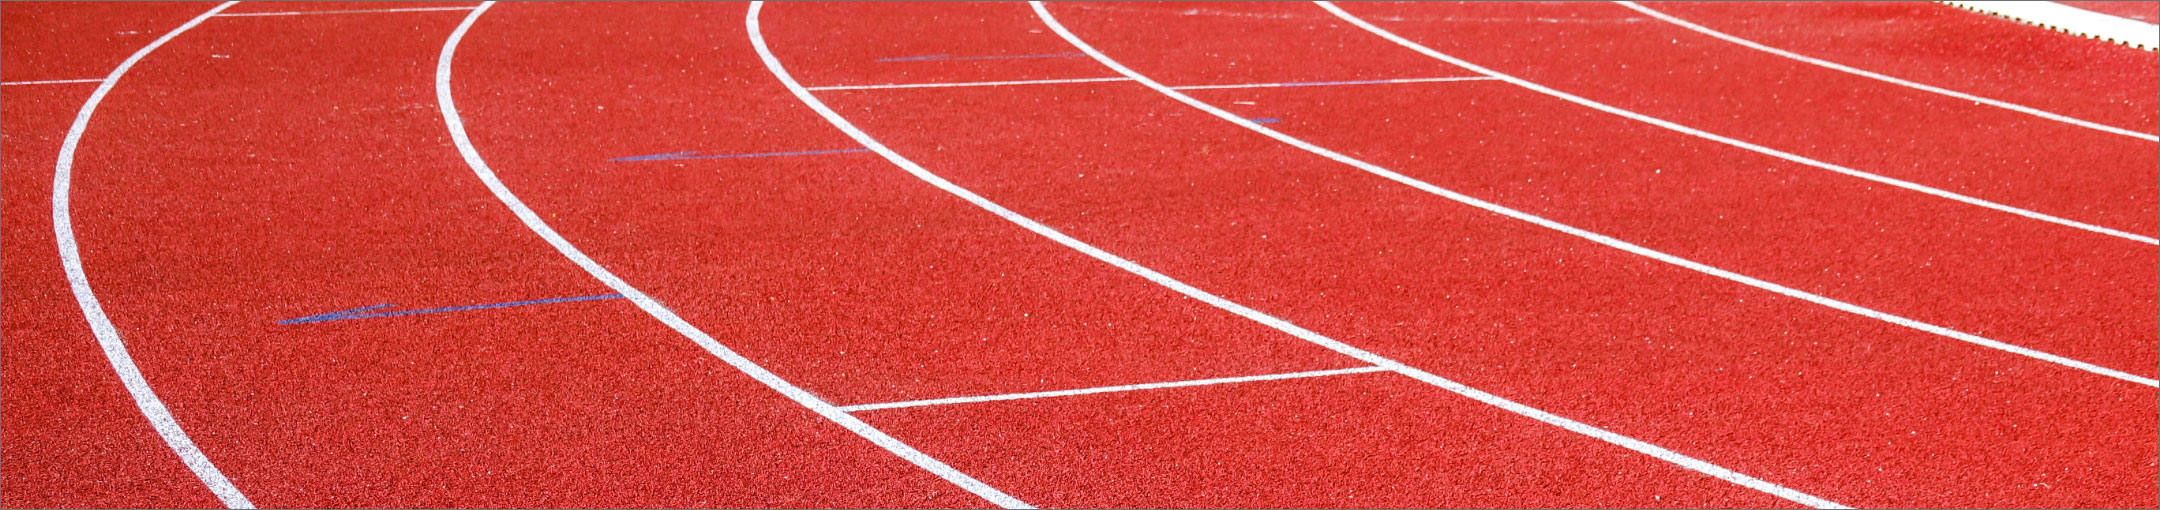 a runner's track with lanes